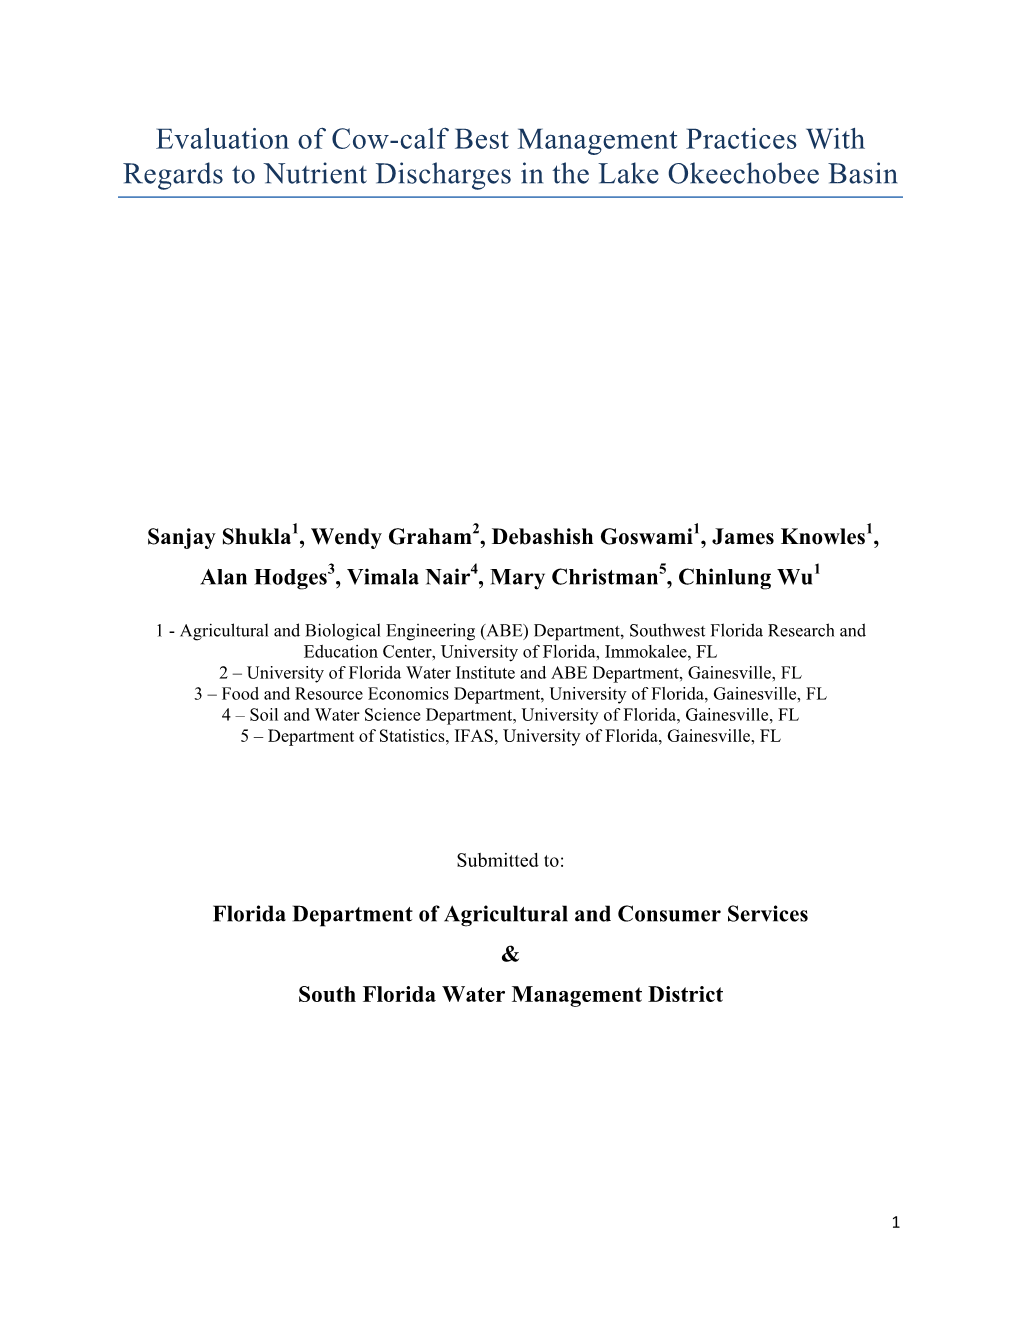 Evaluation of Cow-Calf Best Management Practices with Regards to Nutrient Discharges in the Lake Okeechobee Basin